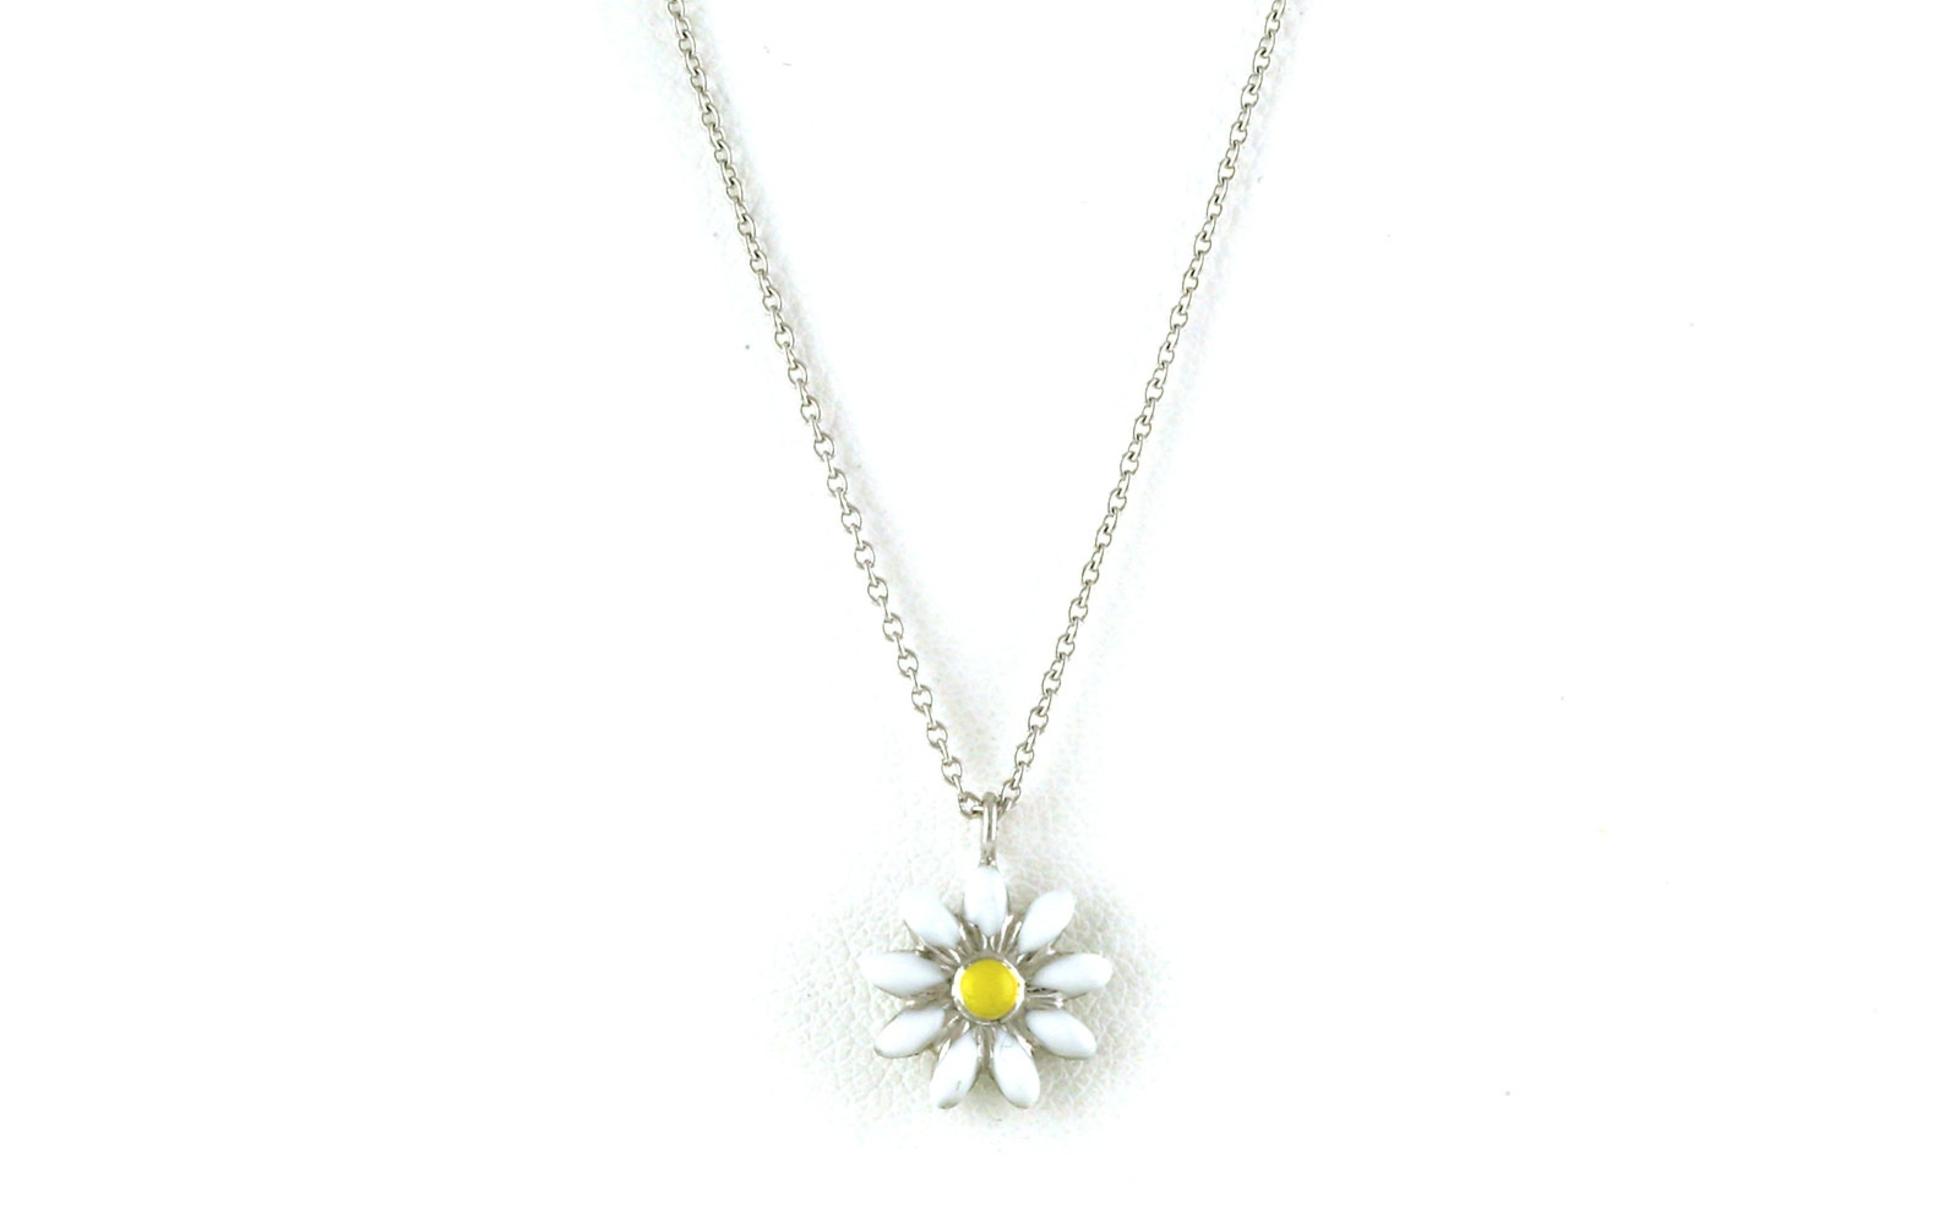 Children's Enameled Daisy Necklace in Sterling Silver